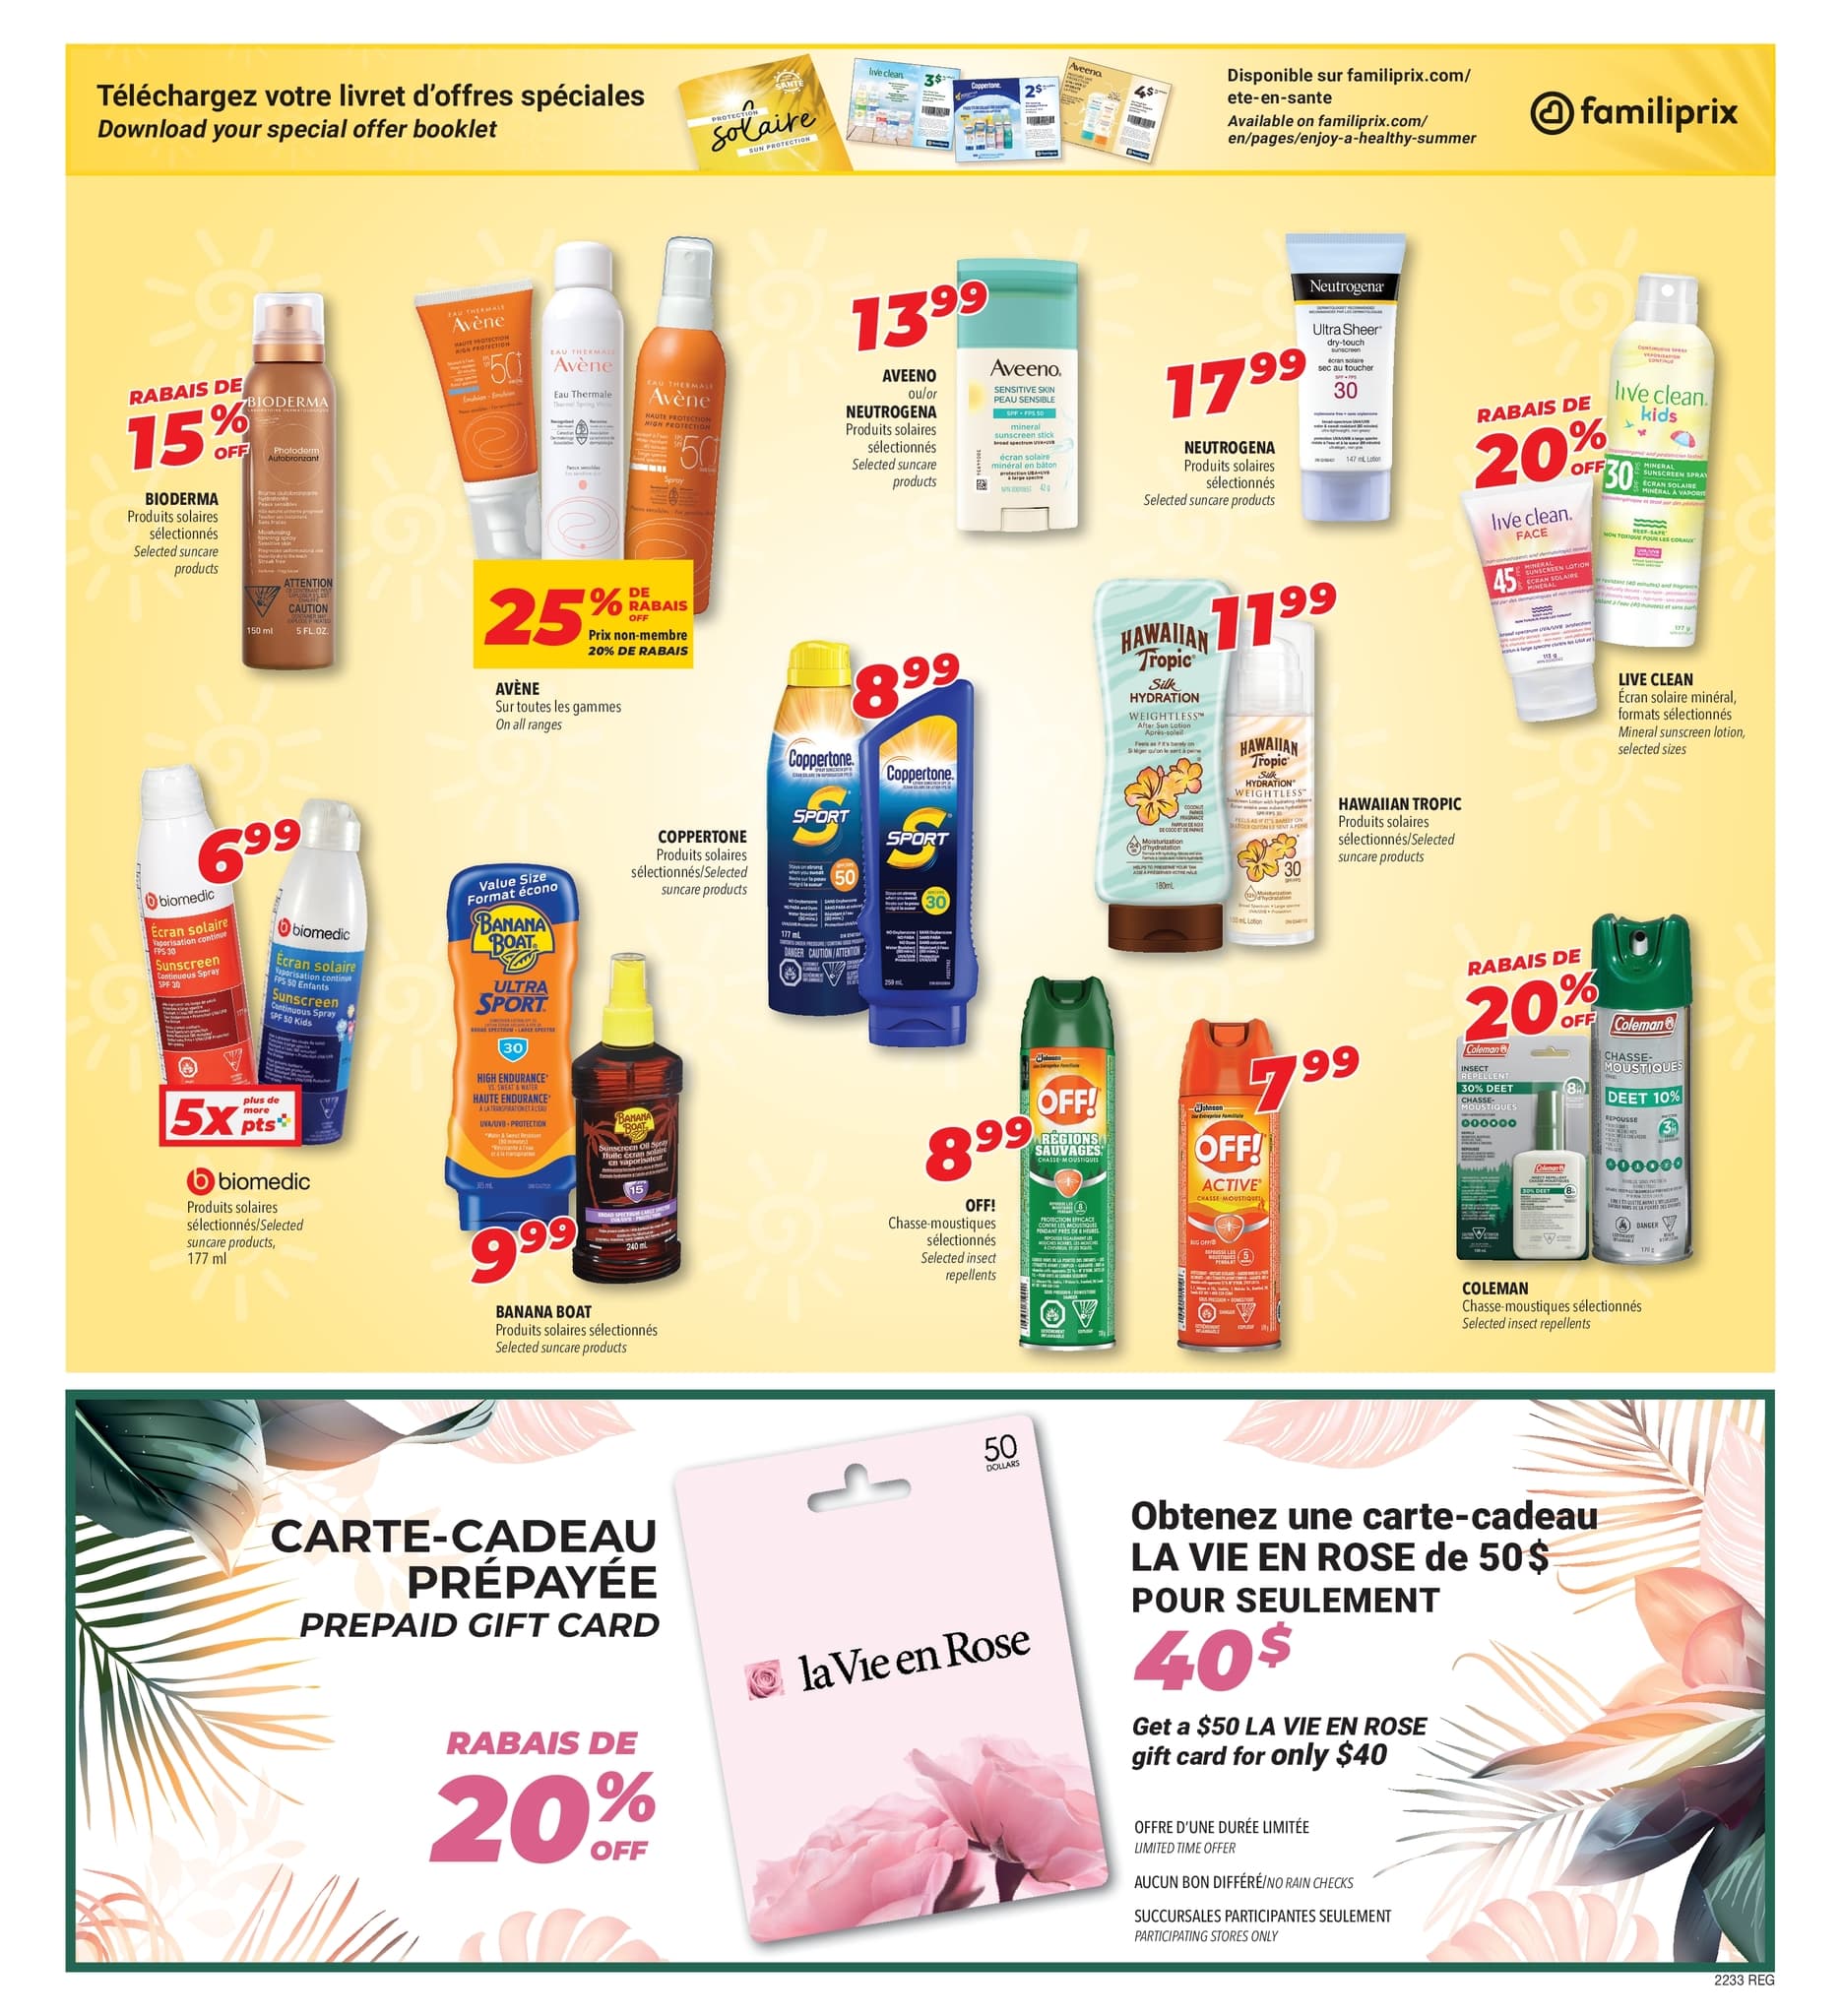 Familiprix - Weekly Flyer Specials - Page 10